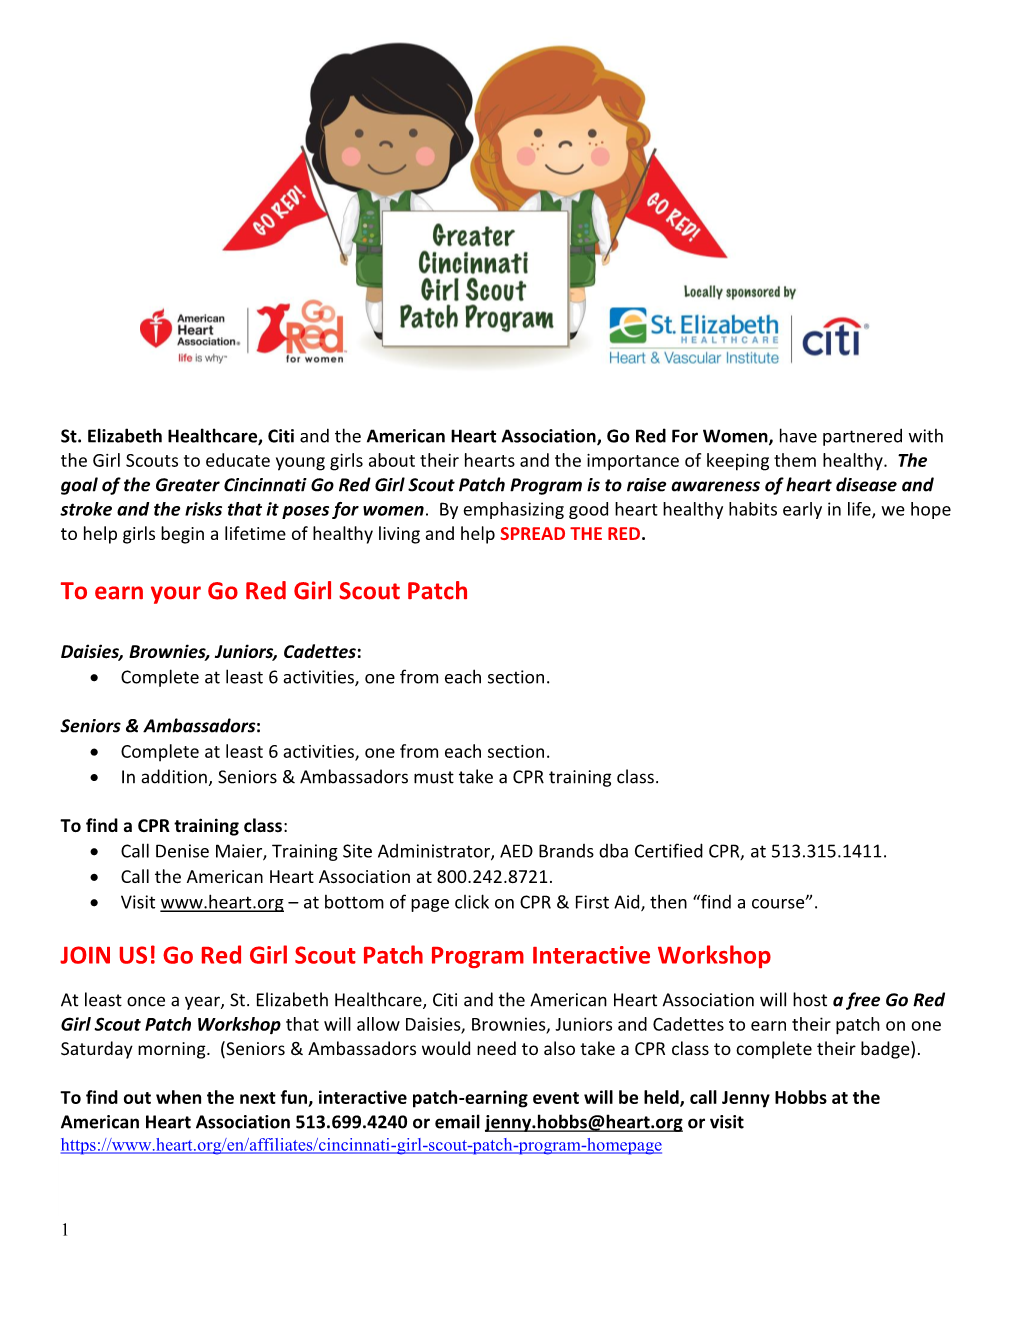 Go Red Girl Scout Patch Program Interactive Workshop